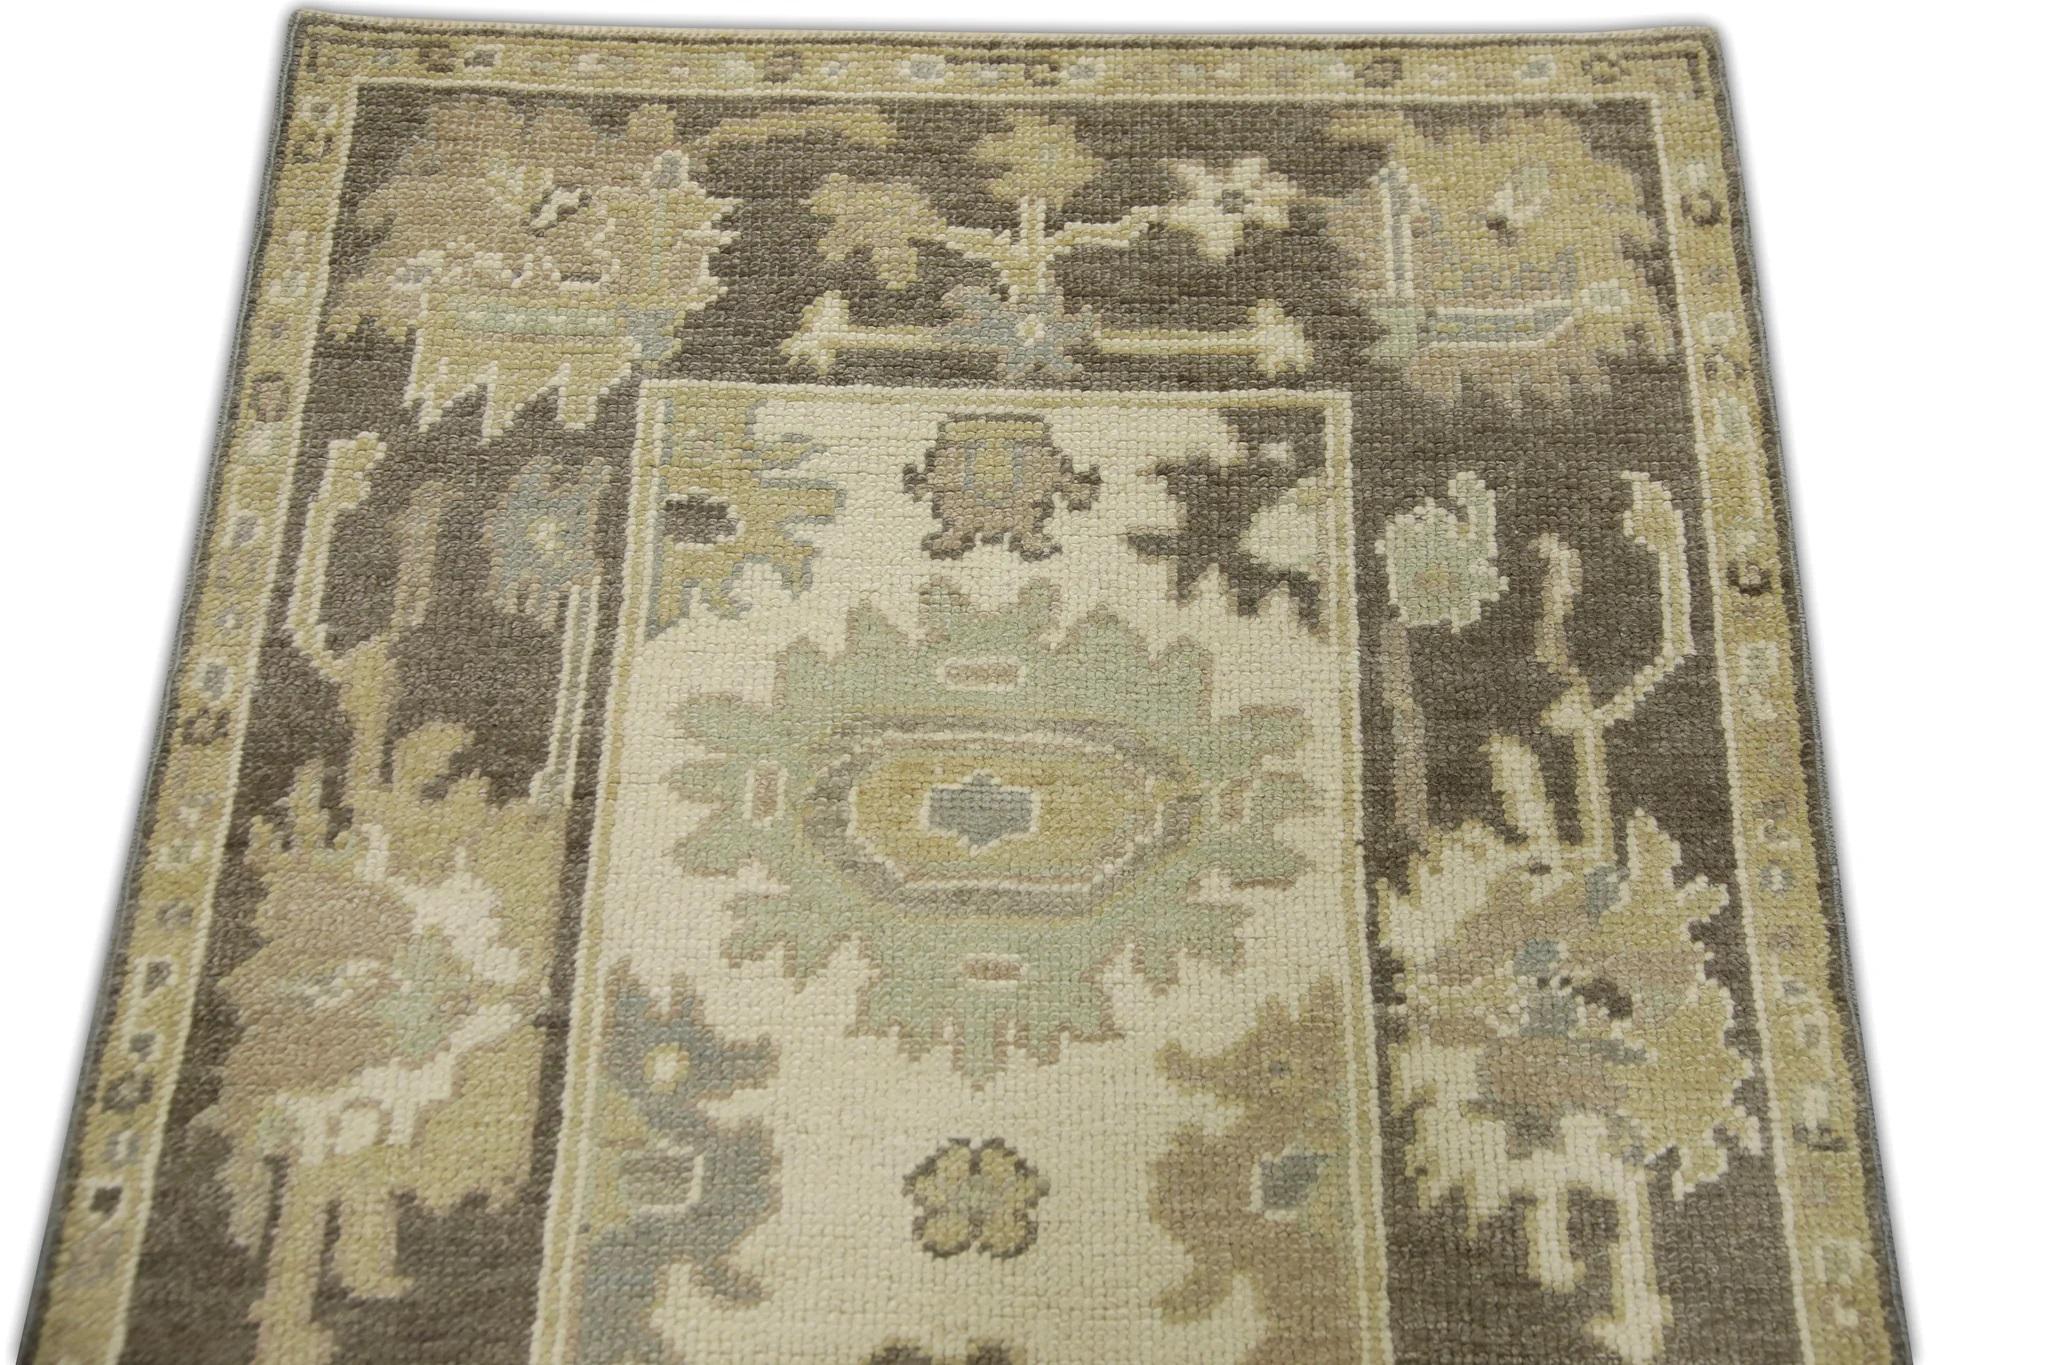 Floral Design Handwoven Wool Turkish Oushak Rug in Brown and Green 2'10